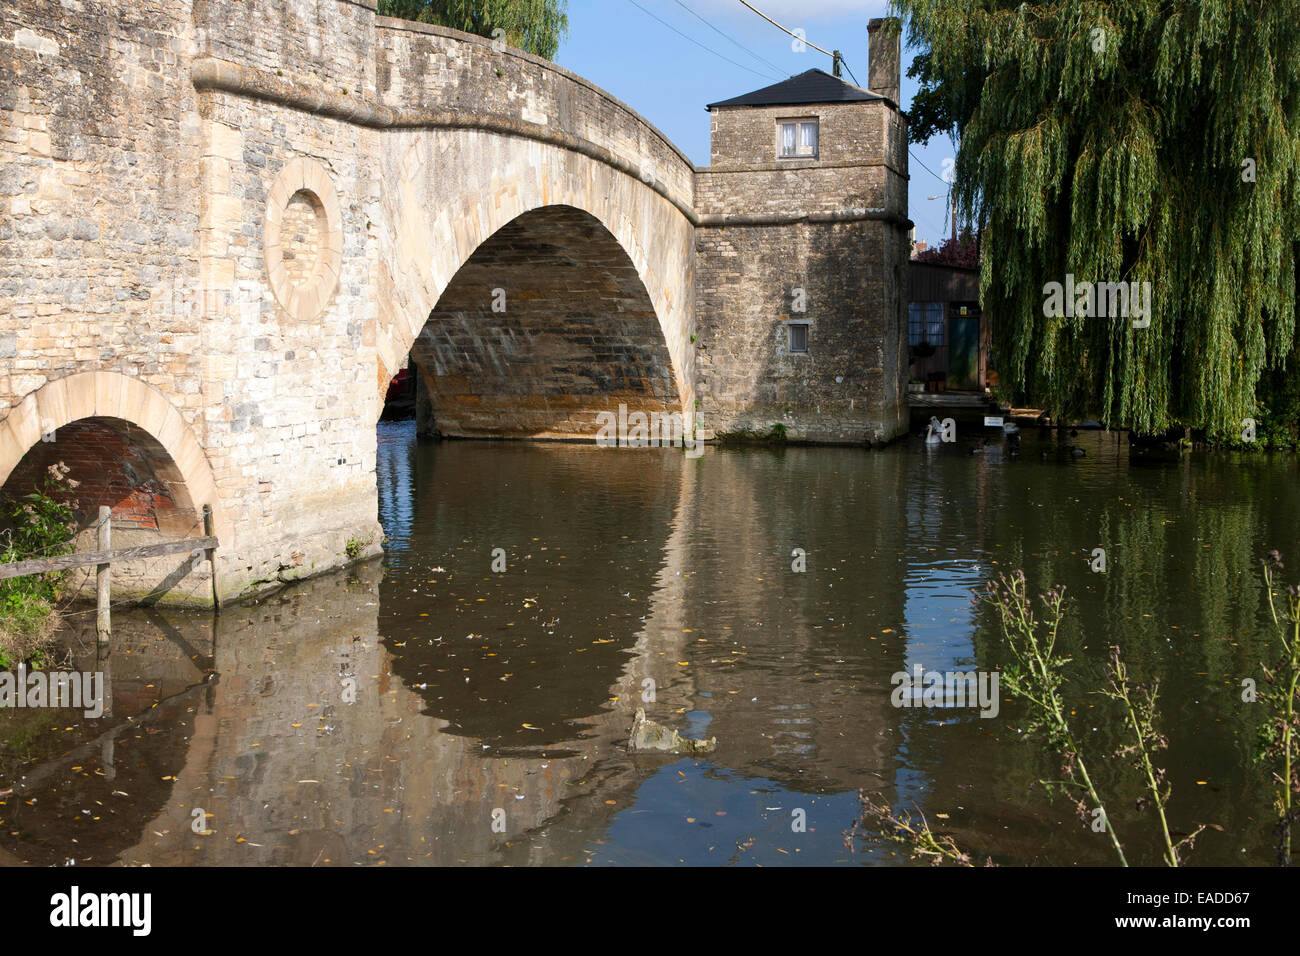 Historic stone bridge crossing River Thames at Lechlade on Thames, Gloucestershire, England, UK Stock Photo